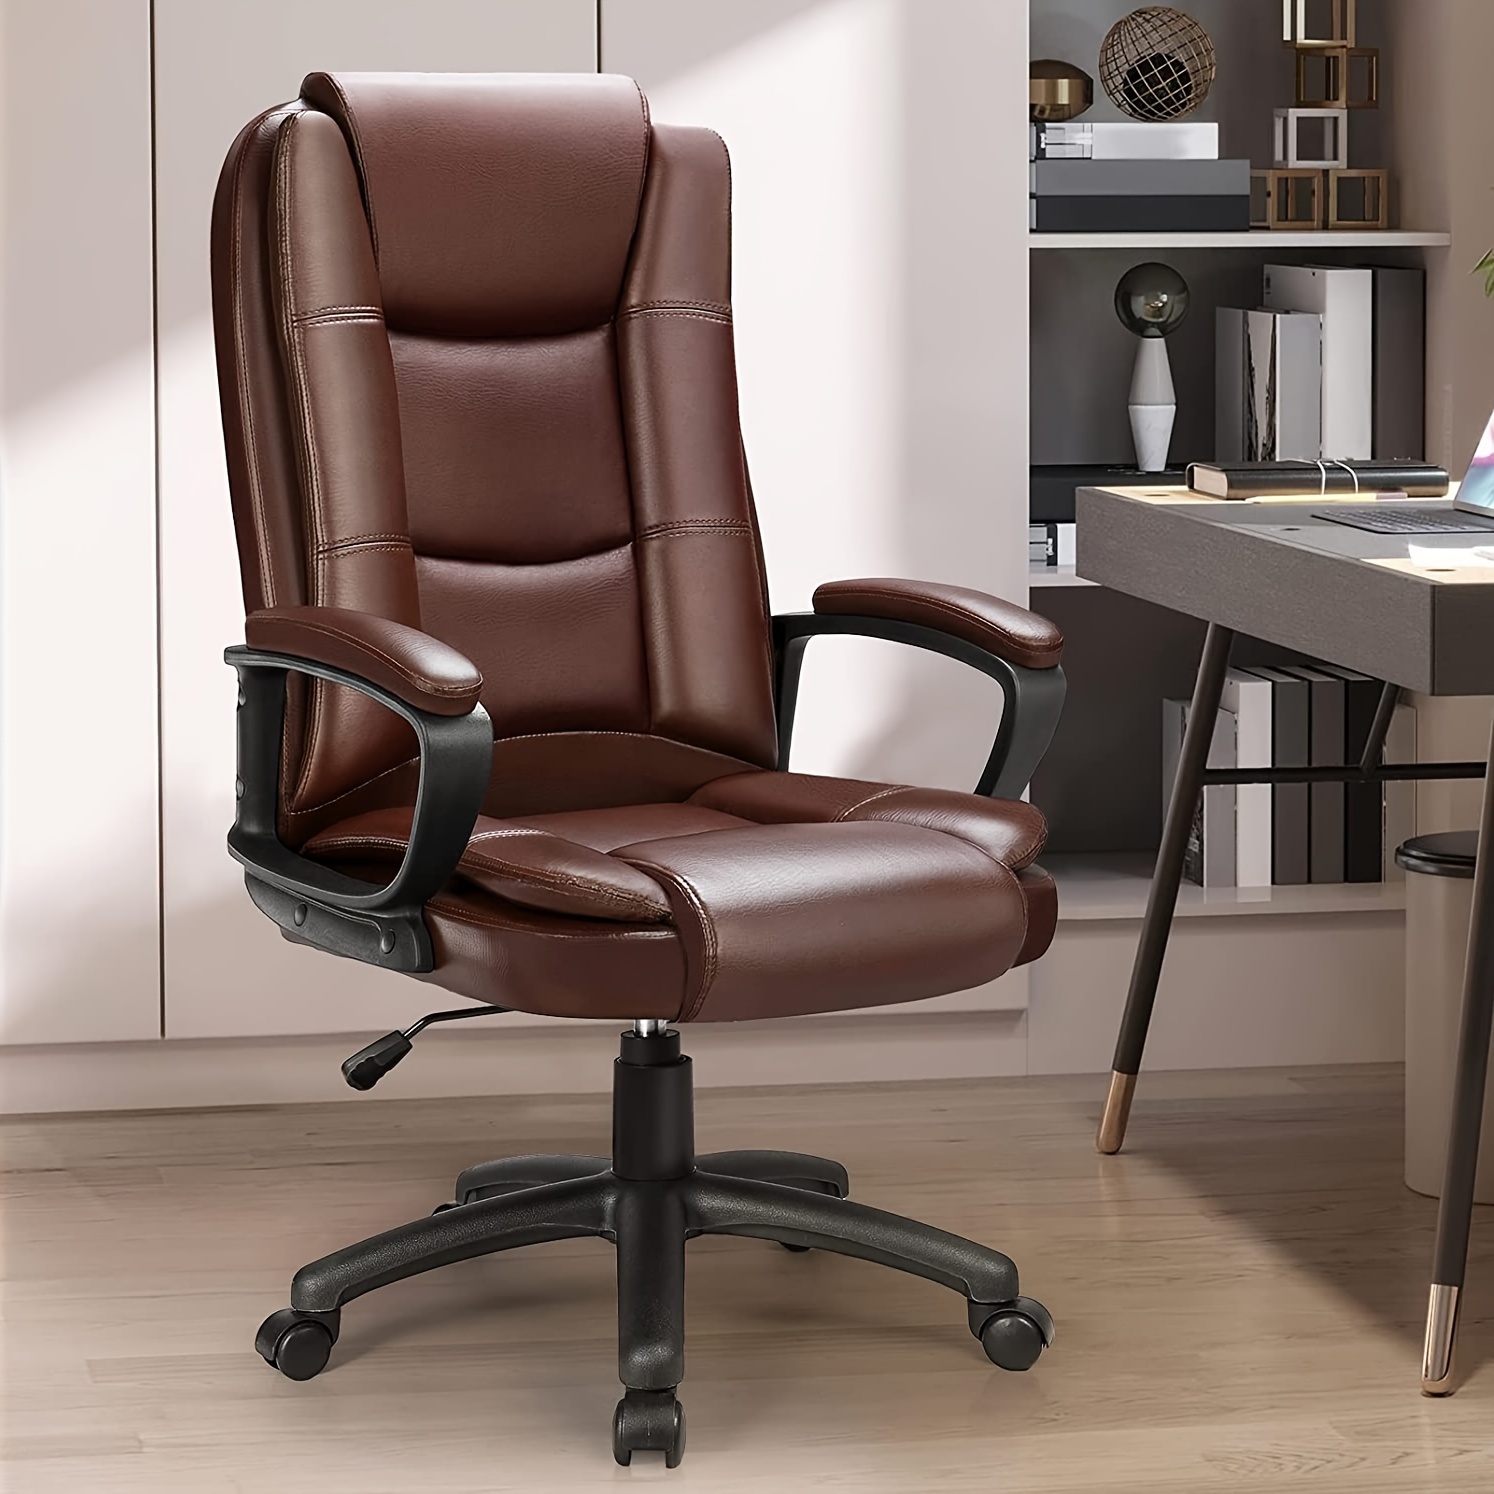 

Home Office Chair, 400lbs Big And Tall Chair Heavy Duty Design, Ergonomic High Back Cushion Lumbar Back Support, Computer Desk Chair, Adjustable Executive Leather Chair With Armrest